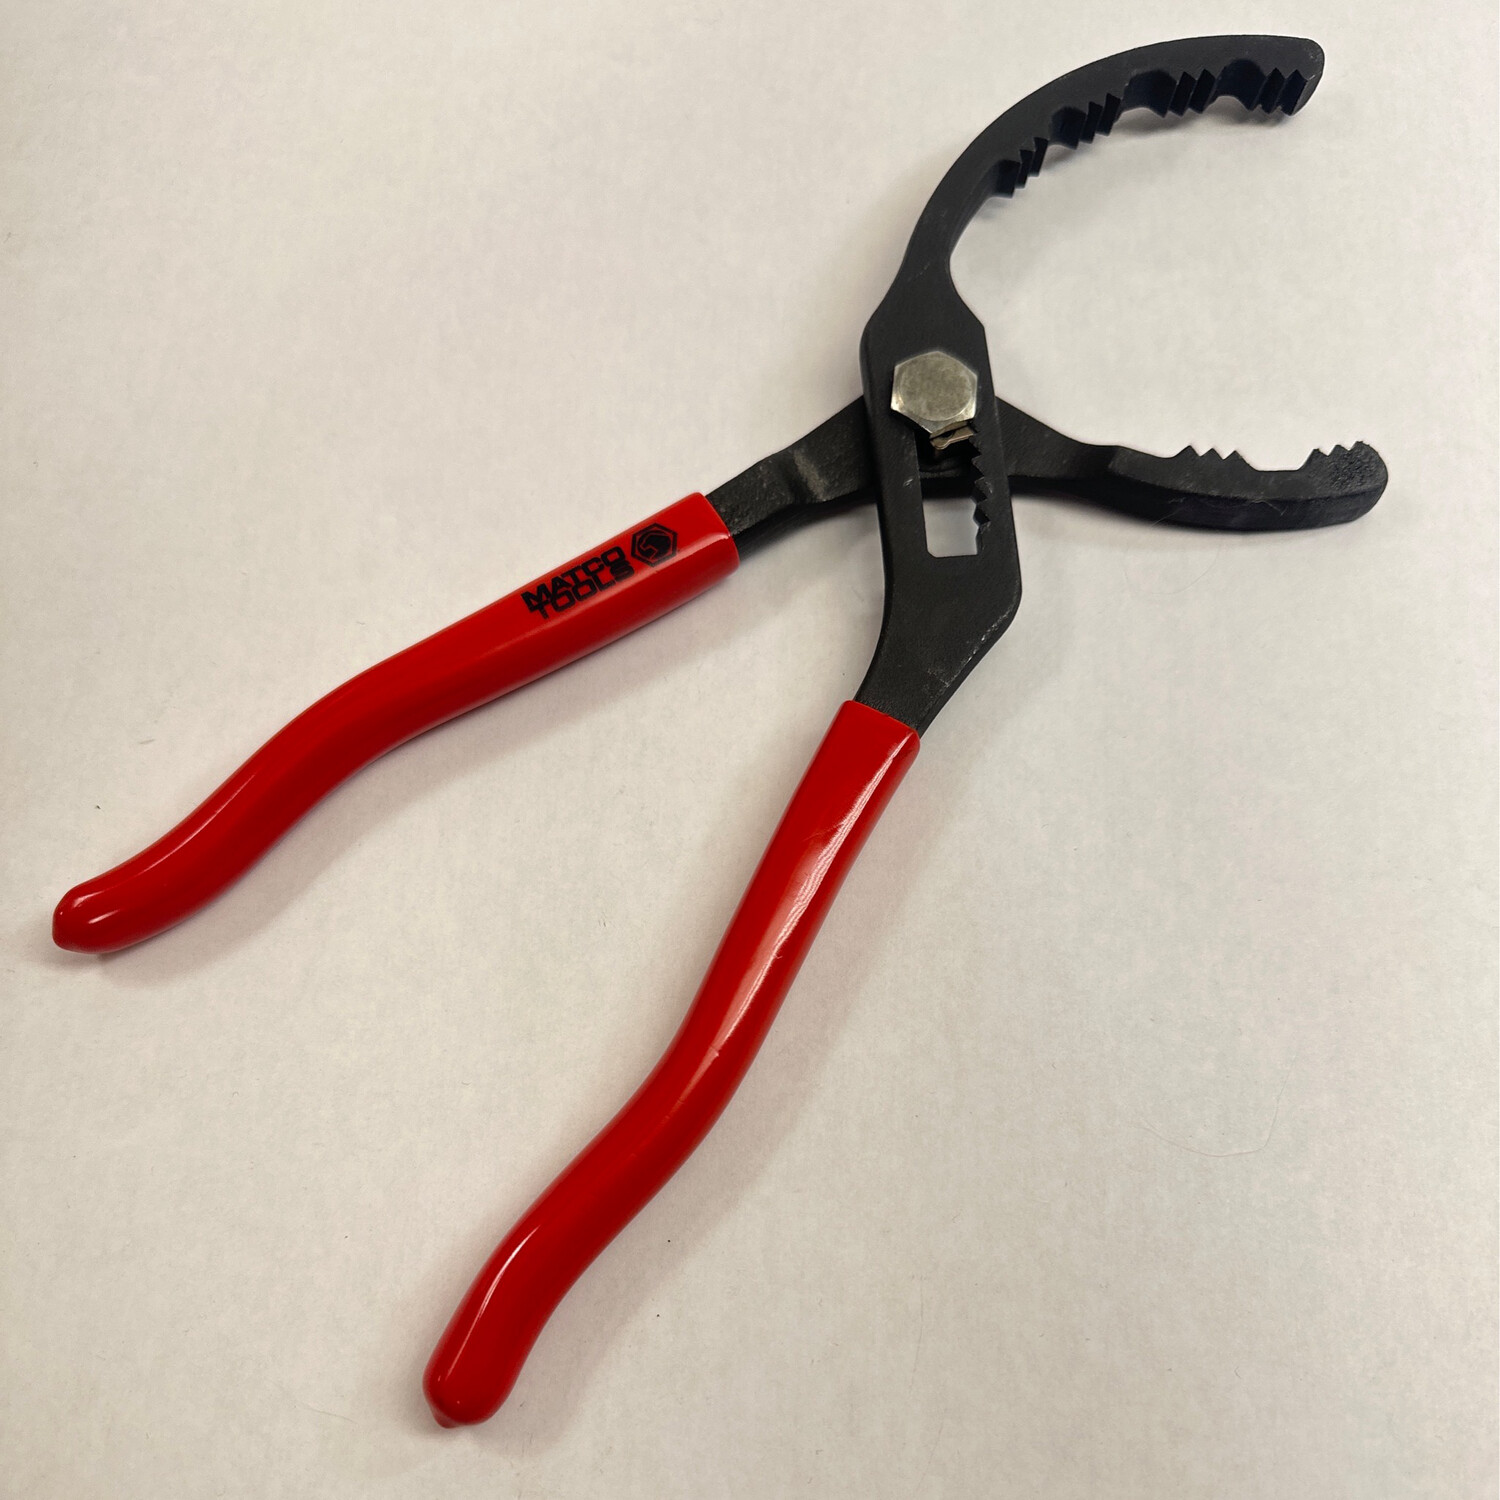 Matco ADJUSTABLE OIL FILTER PLIERS RANGE 2.25" TO 6", OF29700